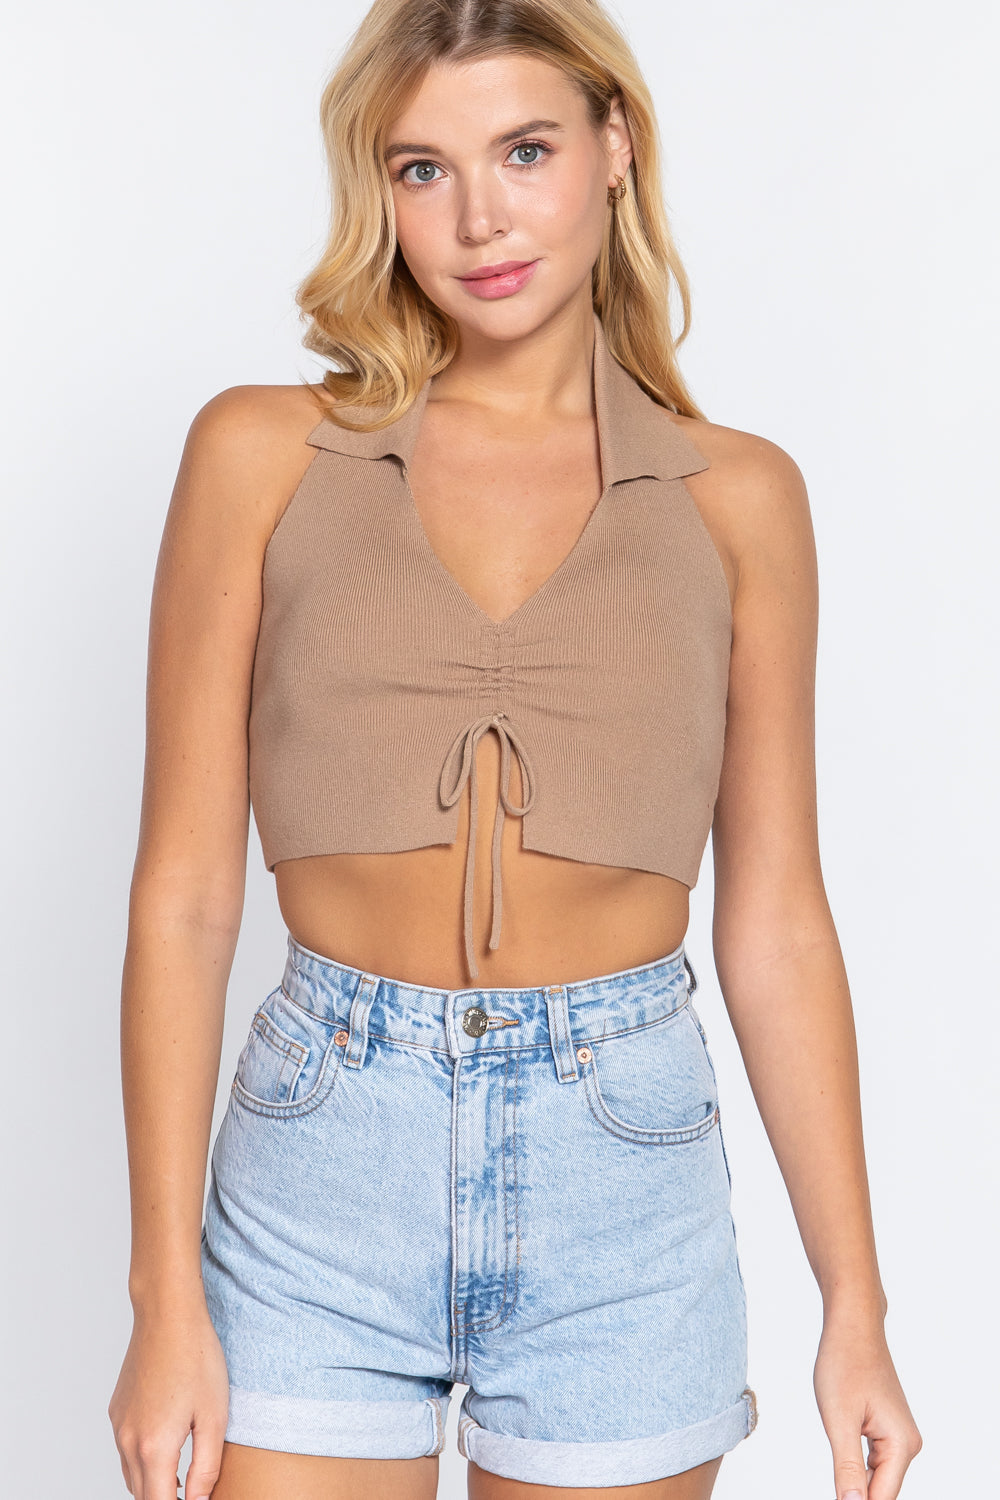 OAT MILK Halter Ruched Cropped Knit Top -6 colors - Ships from the US - women's halter top at TFC&H Co.